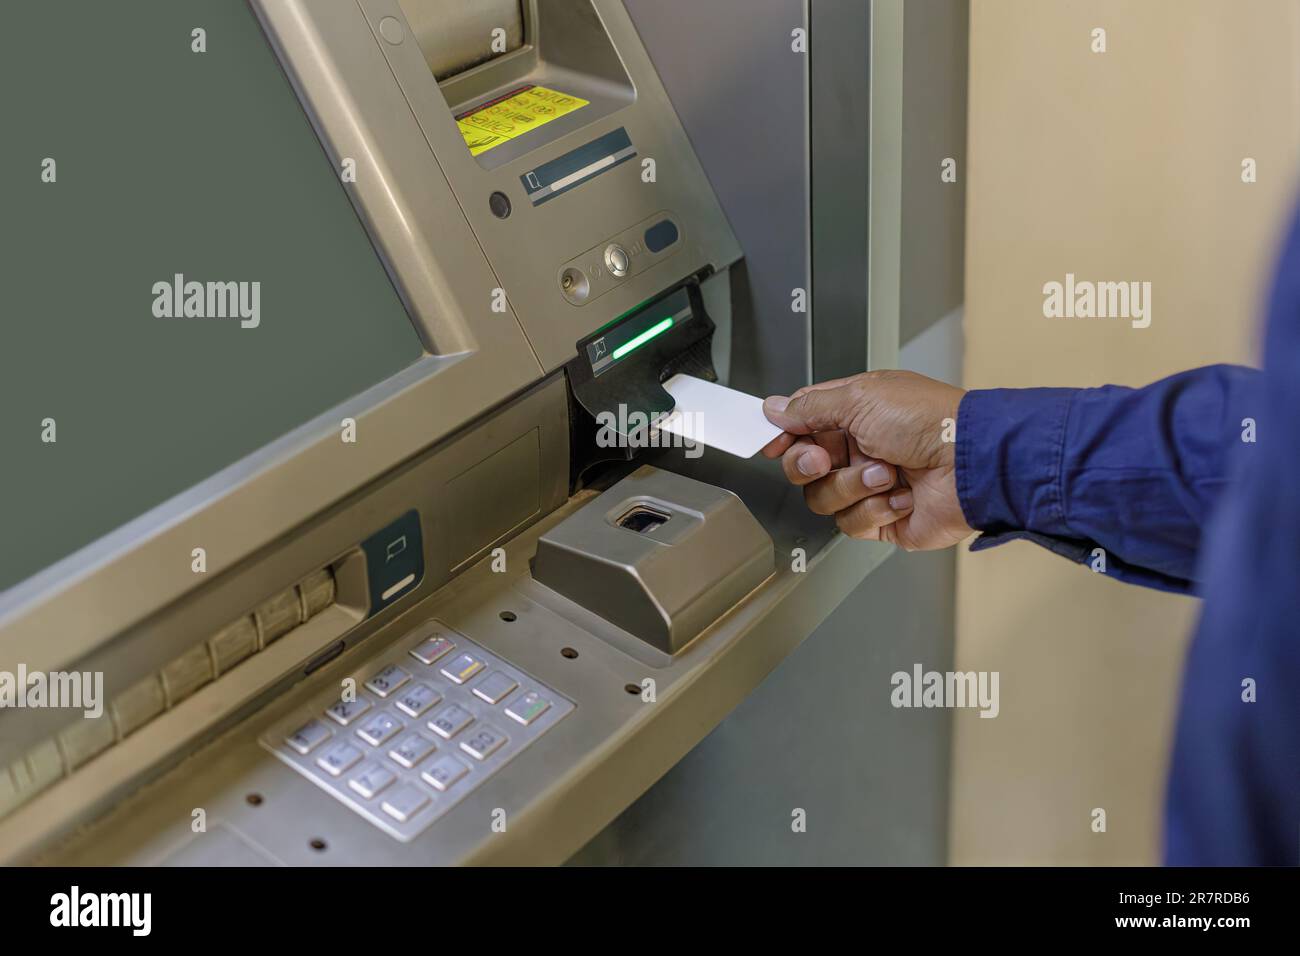 A man's hand inserting a blank card into an ATM. Stock Photo